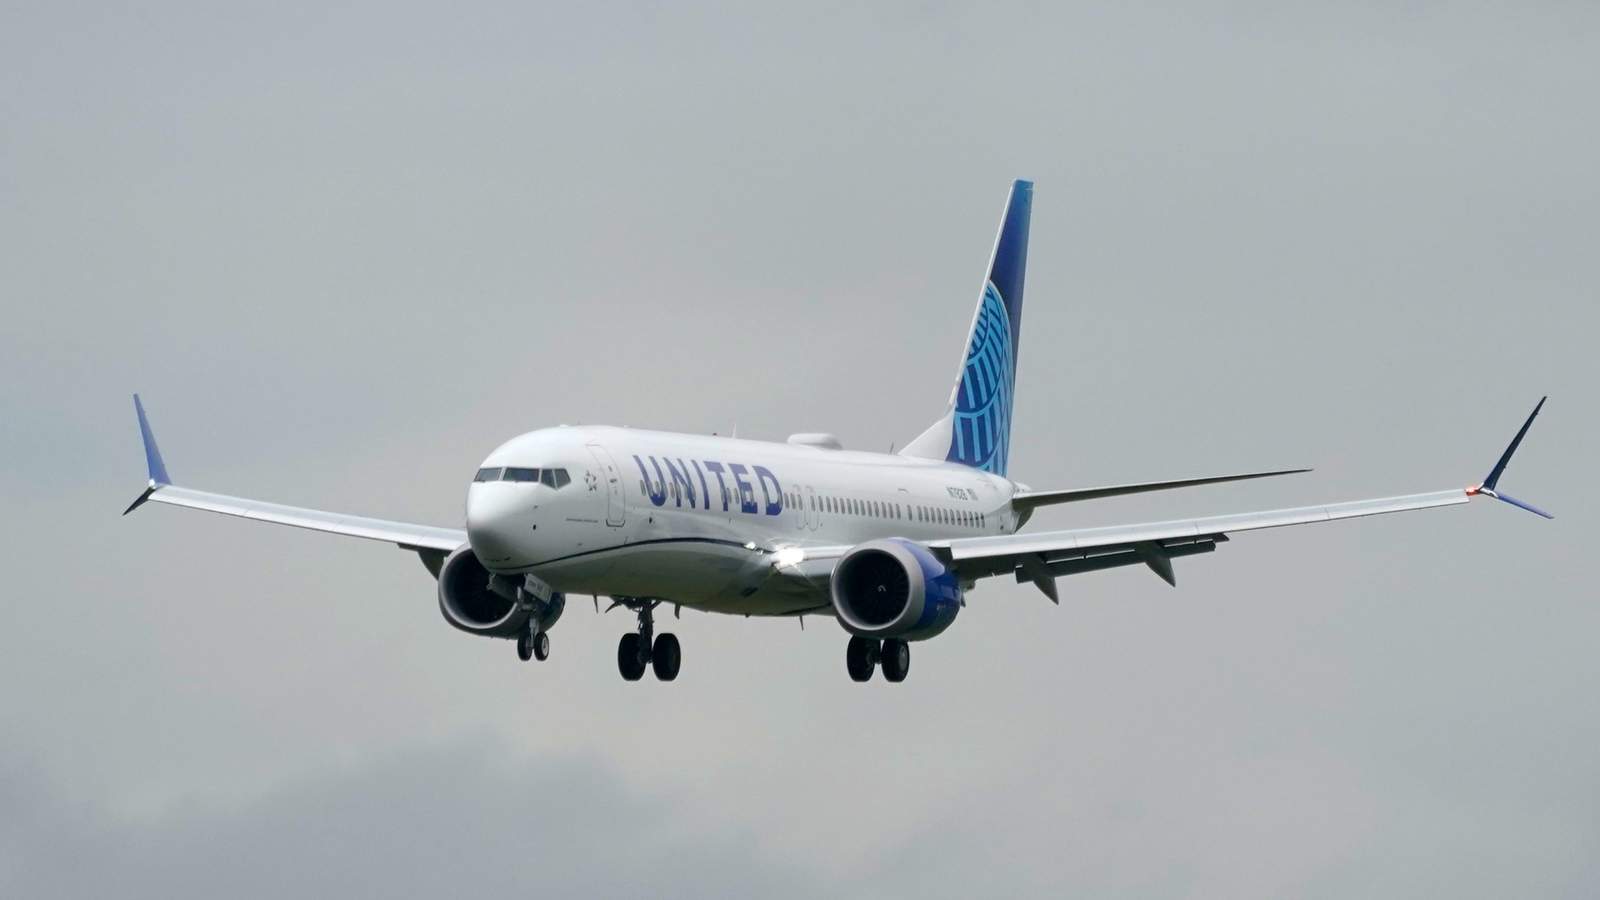 United Airlines offering COVID-19 tests for some passengers